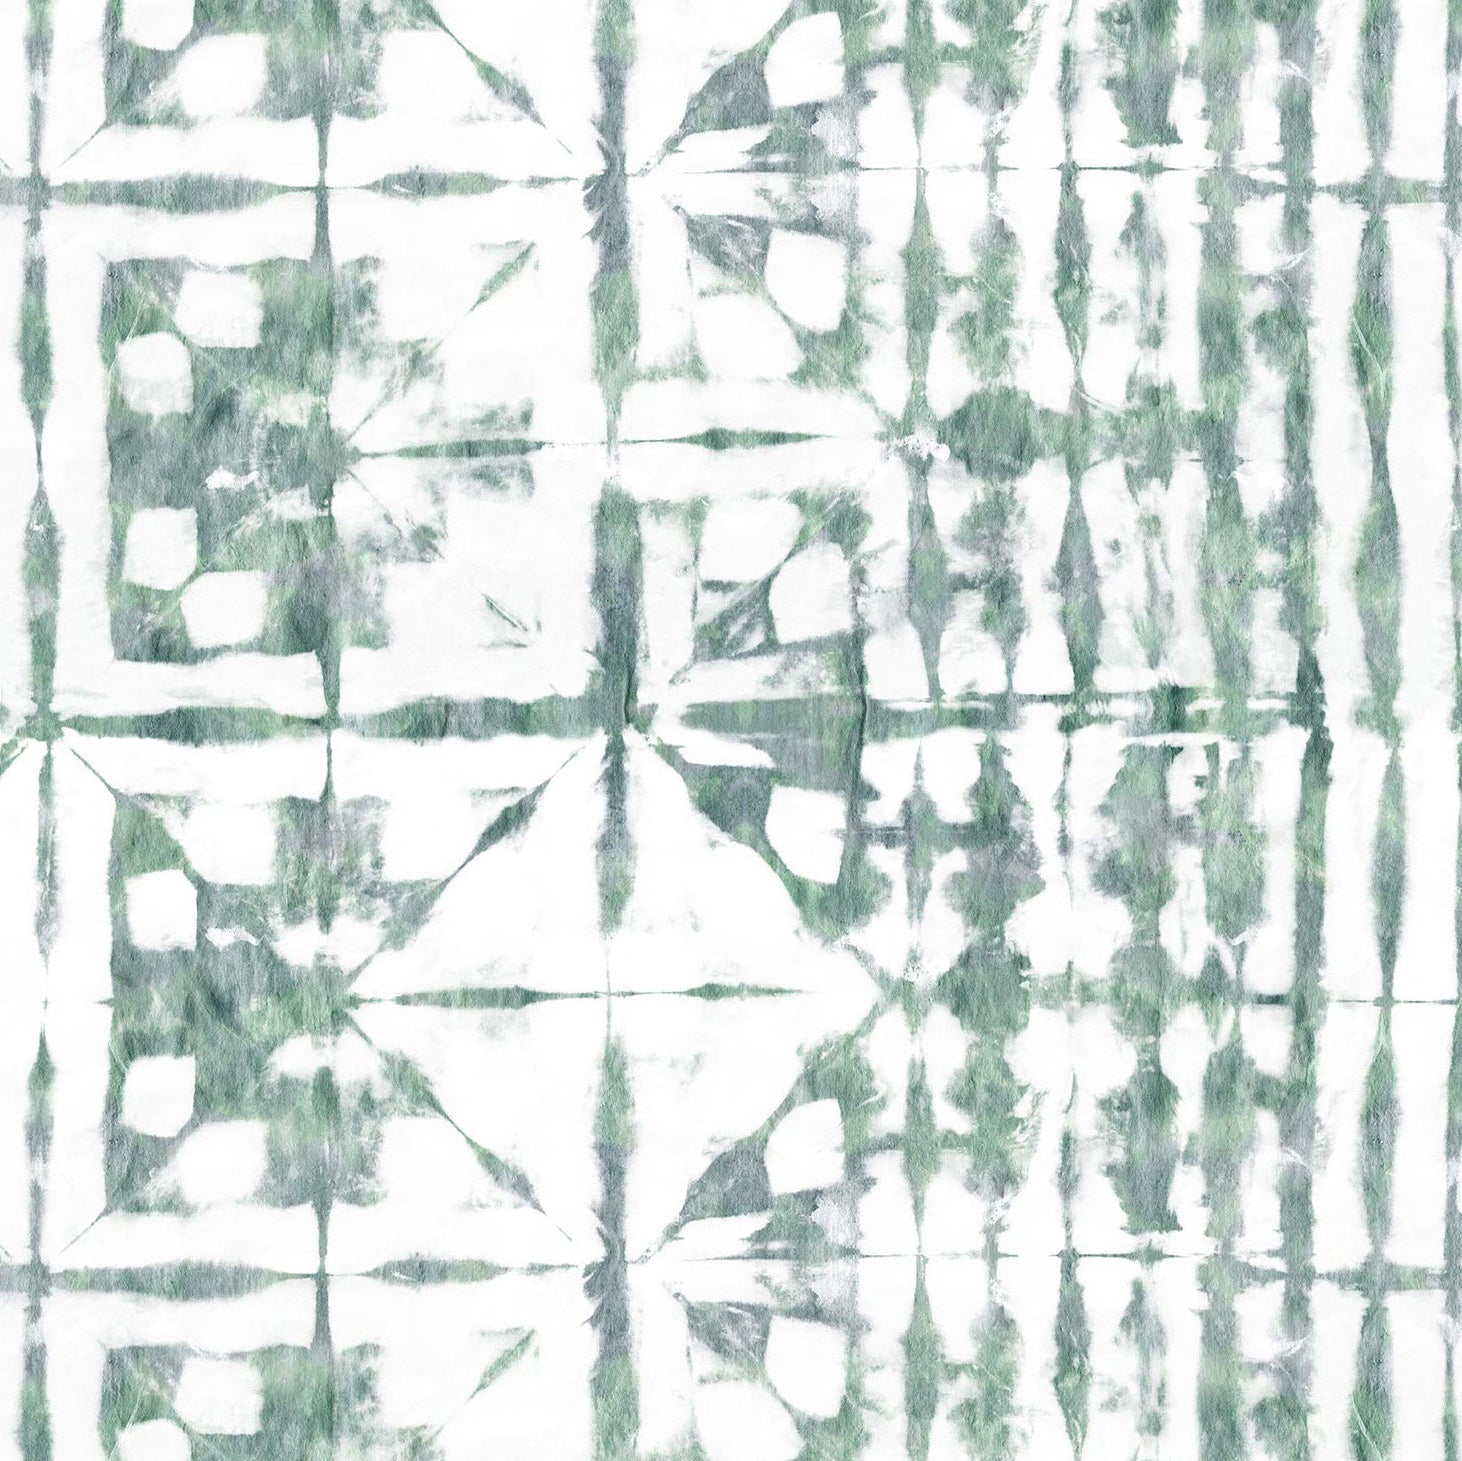 Detail of wallpaper in an abstract dyed grid print in mottled white and green.